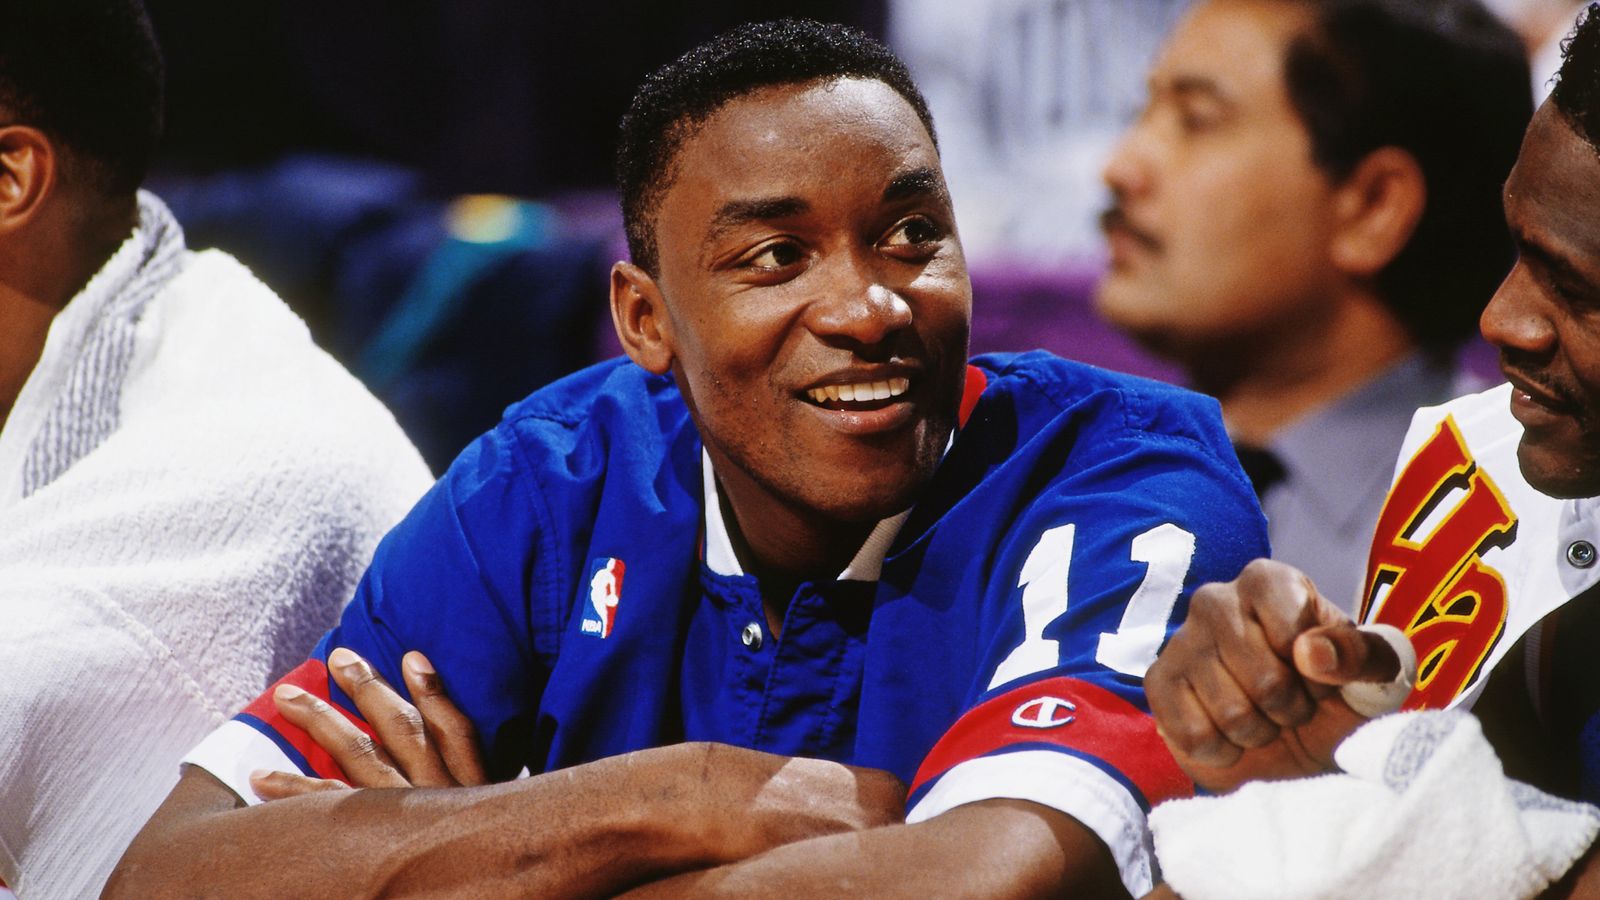 All Star 2021 Nba Icon Isiah Thomas Talks All Star Memories And Reveals Dream Dunk Contest Line Up Nba News Sky Sports